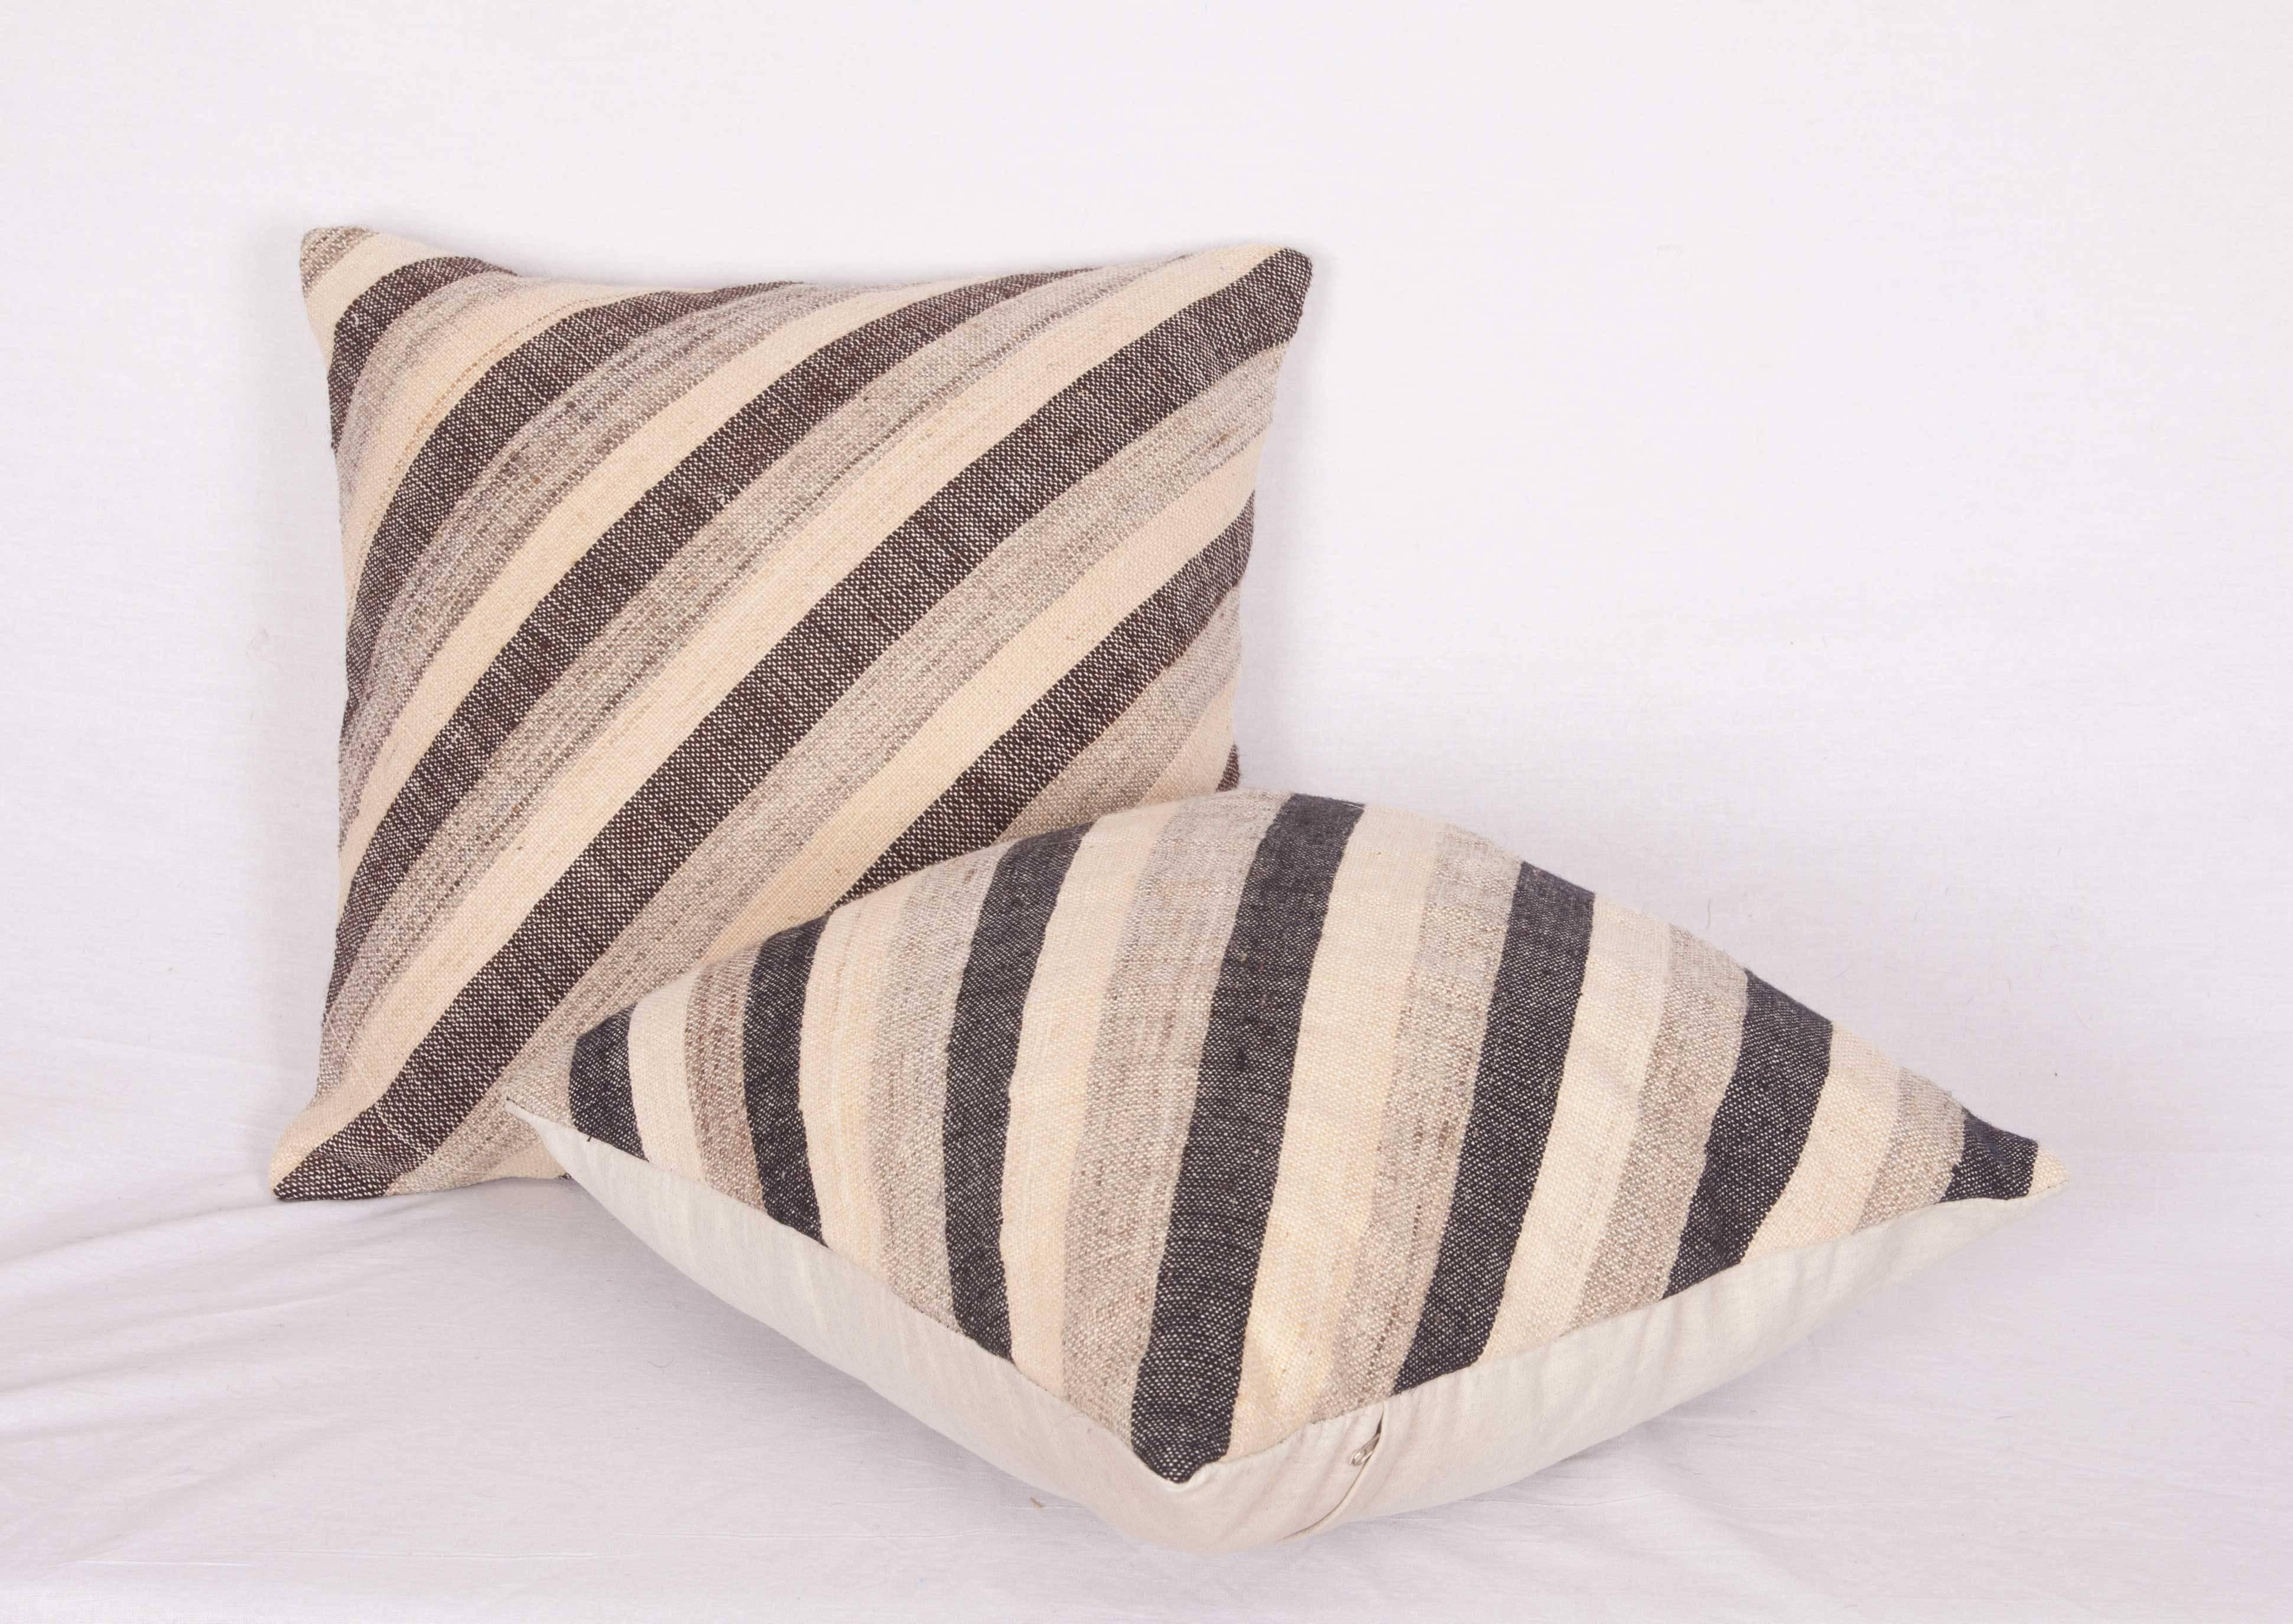 Woven Pillows Made Out of an Anatolian Turkish Mid-20th Century Kilim